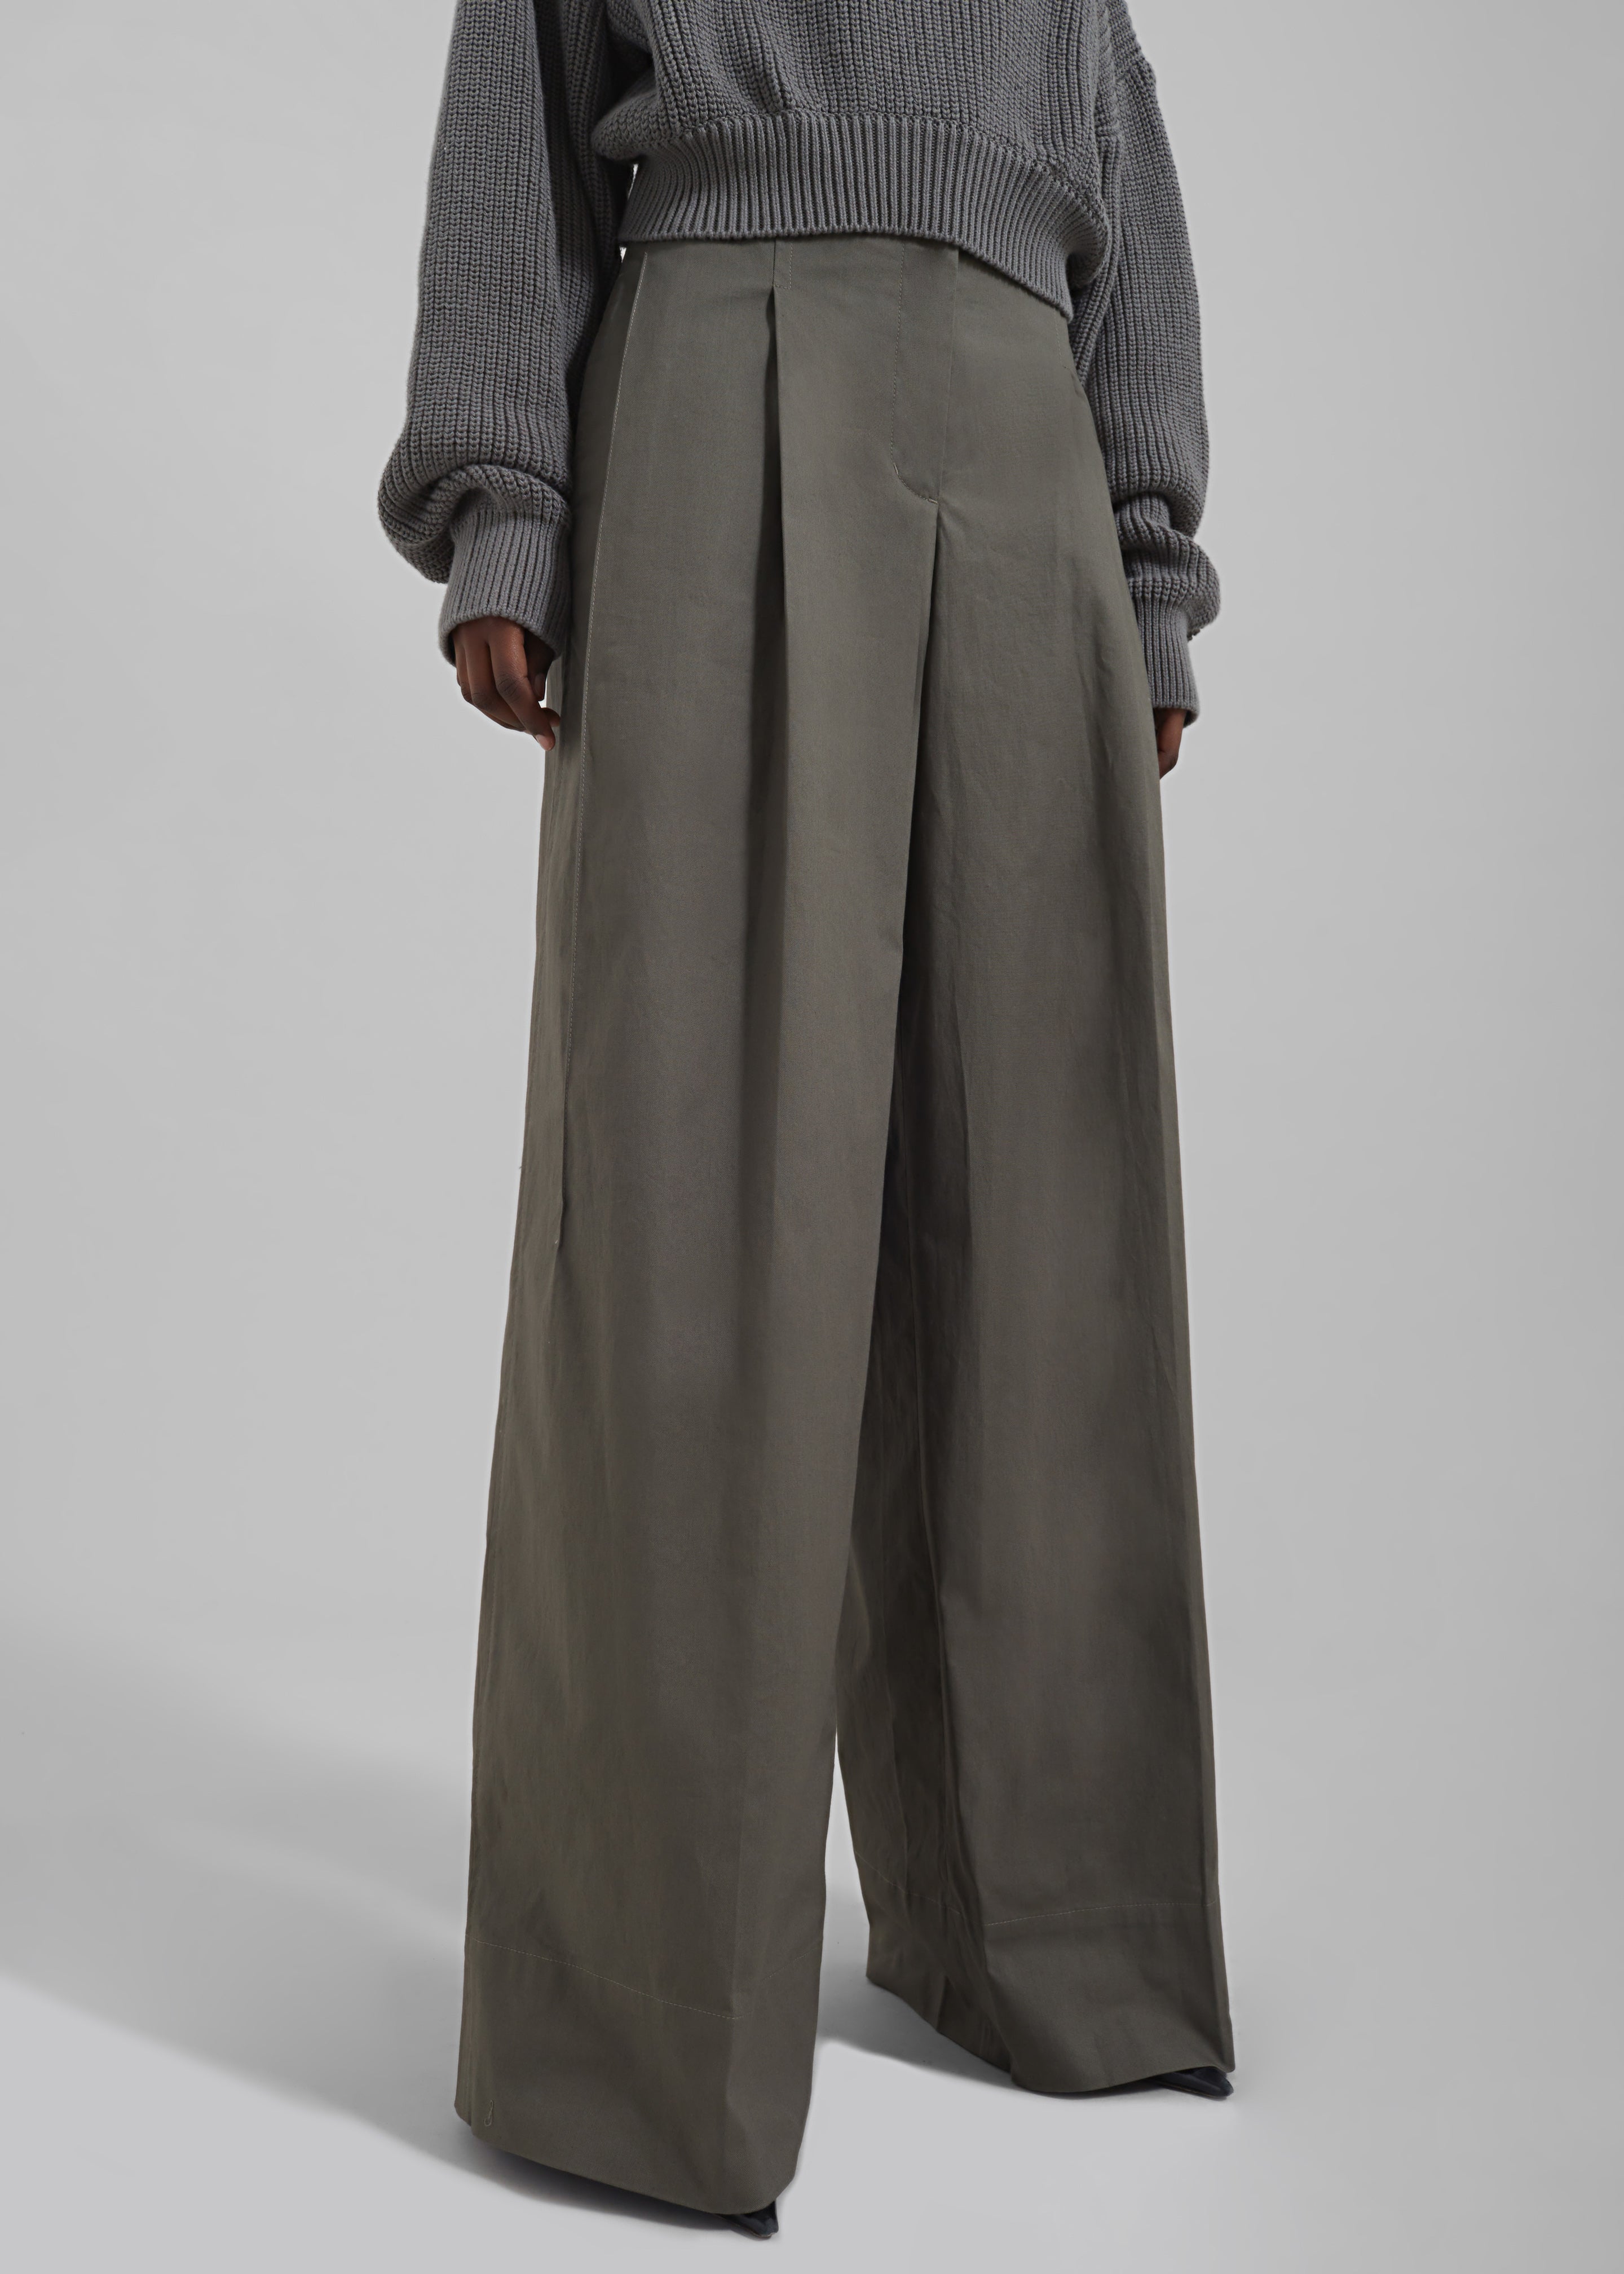 3.1 Phillip Lim Double Pleated Wide Leg Trousers - Army - 2